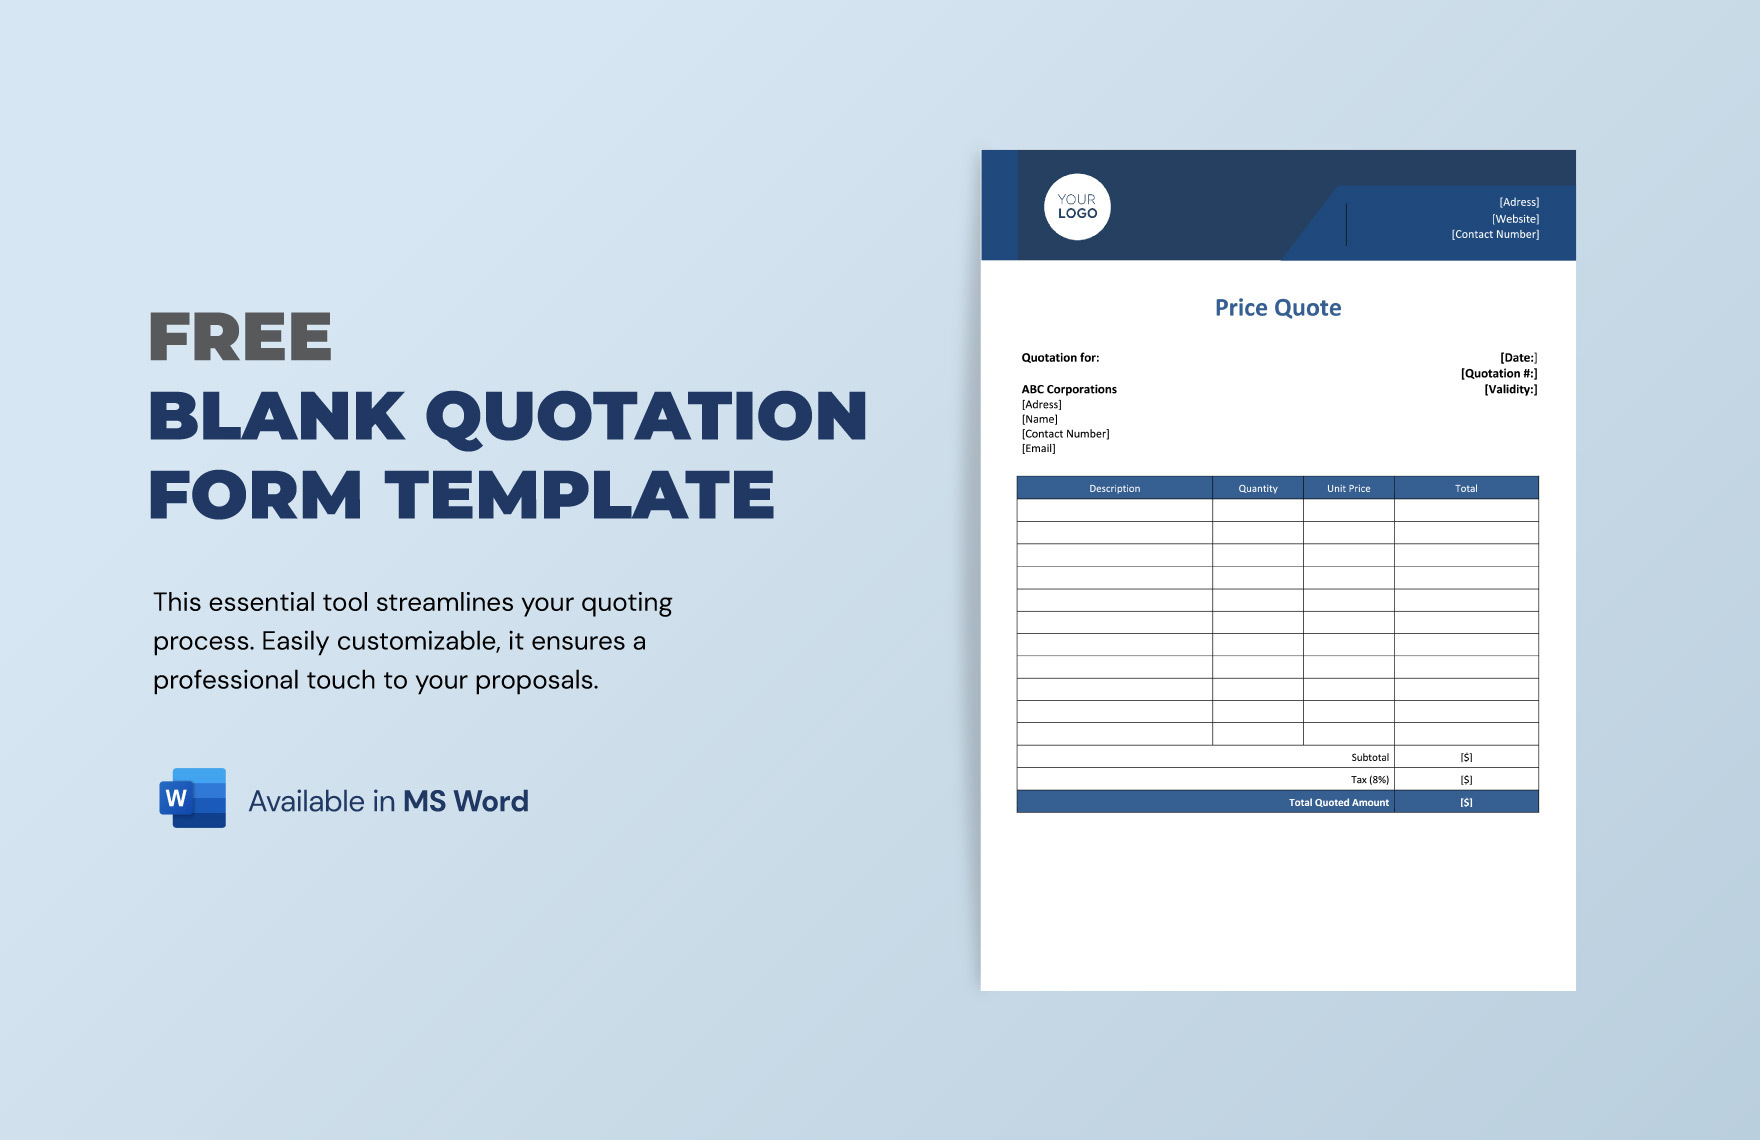 Free Blank Quotation Form Template